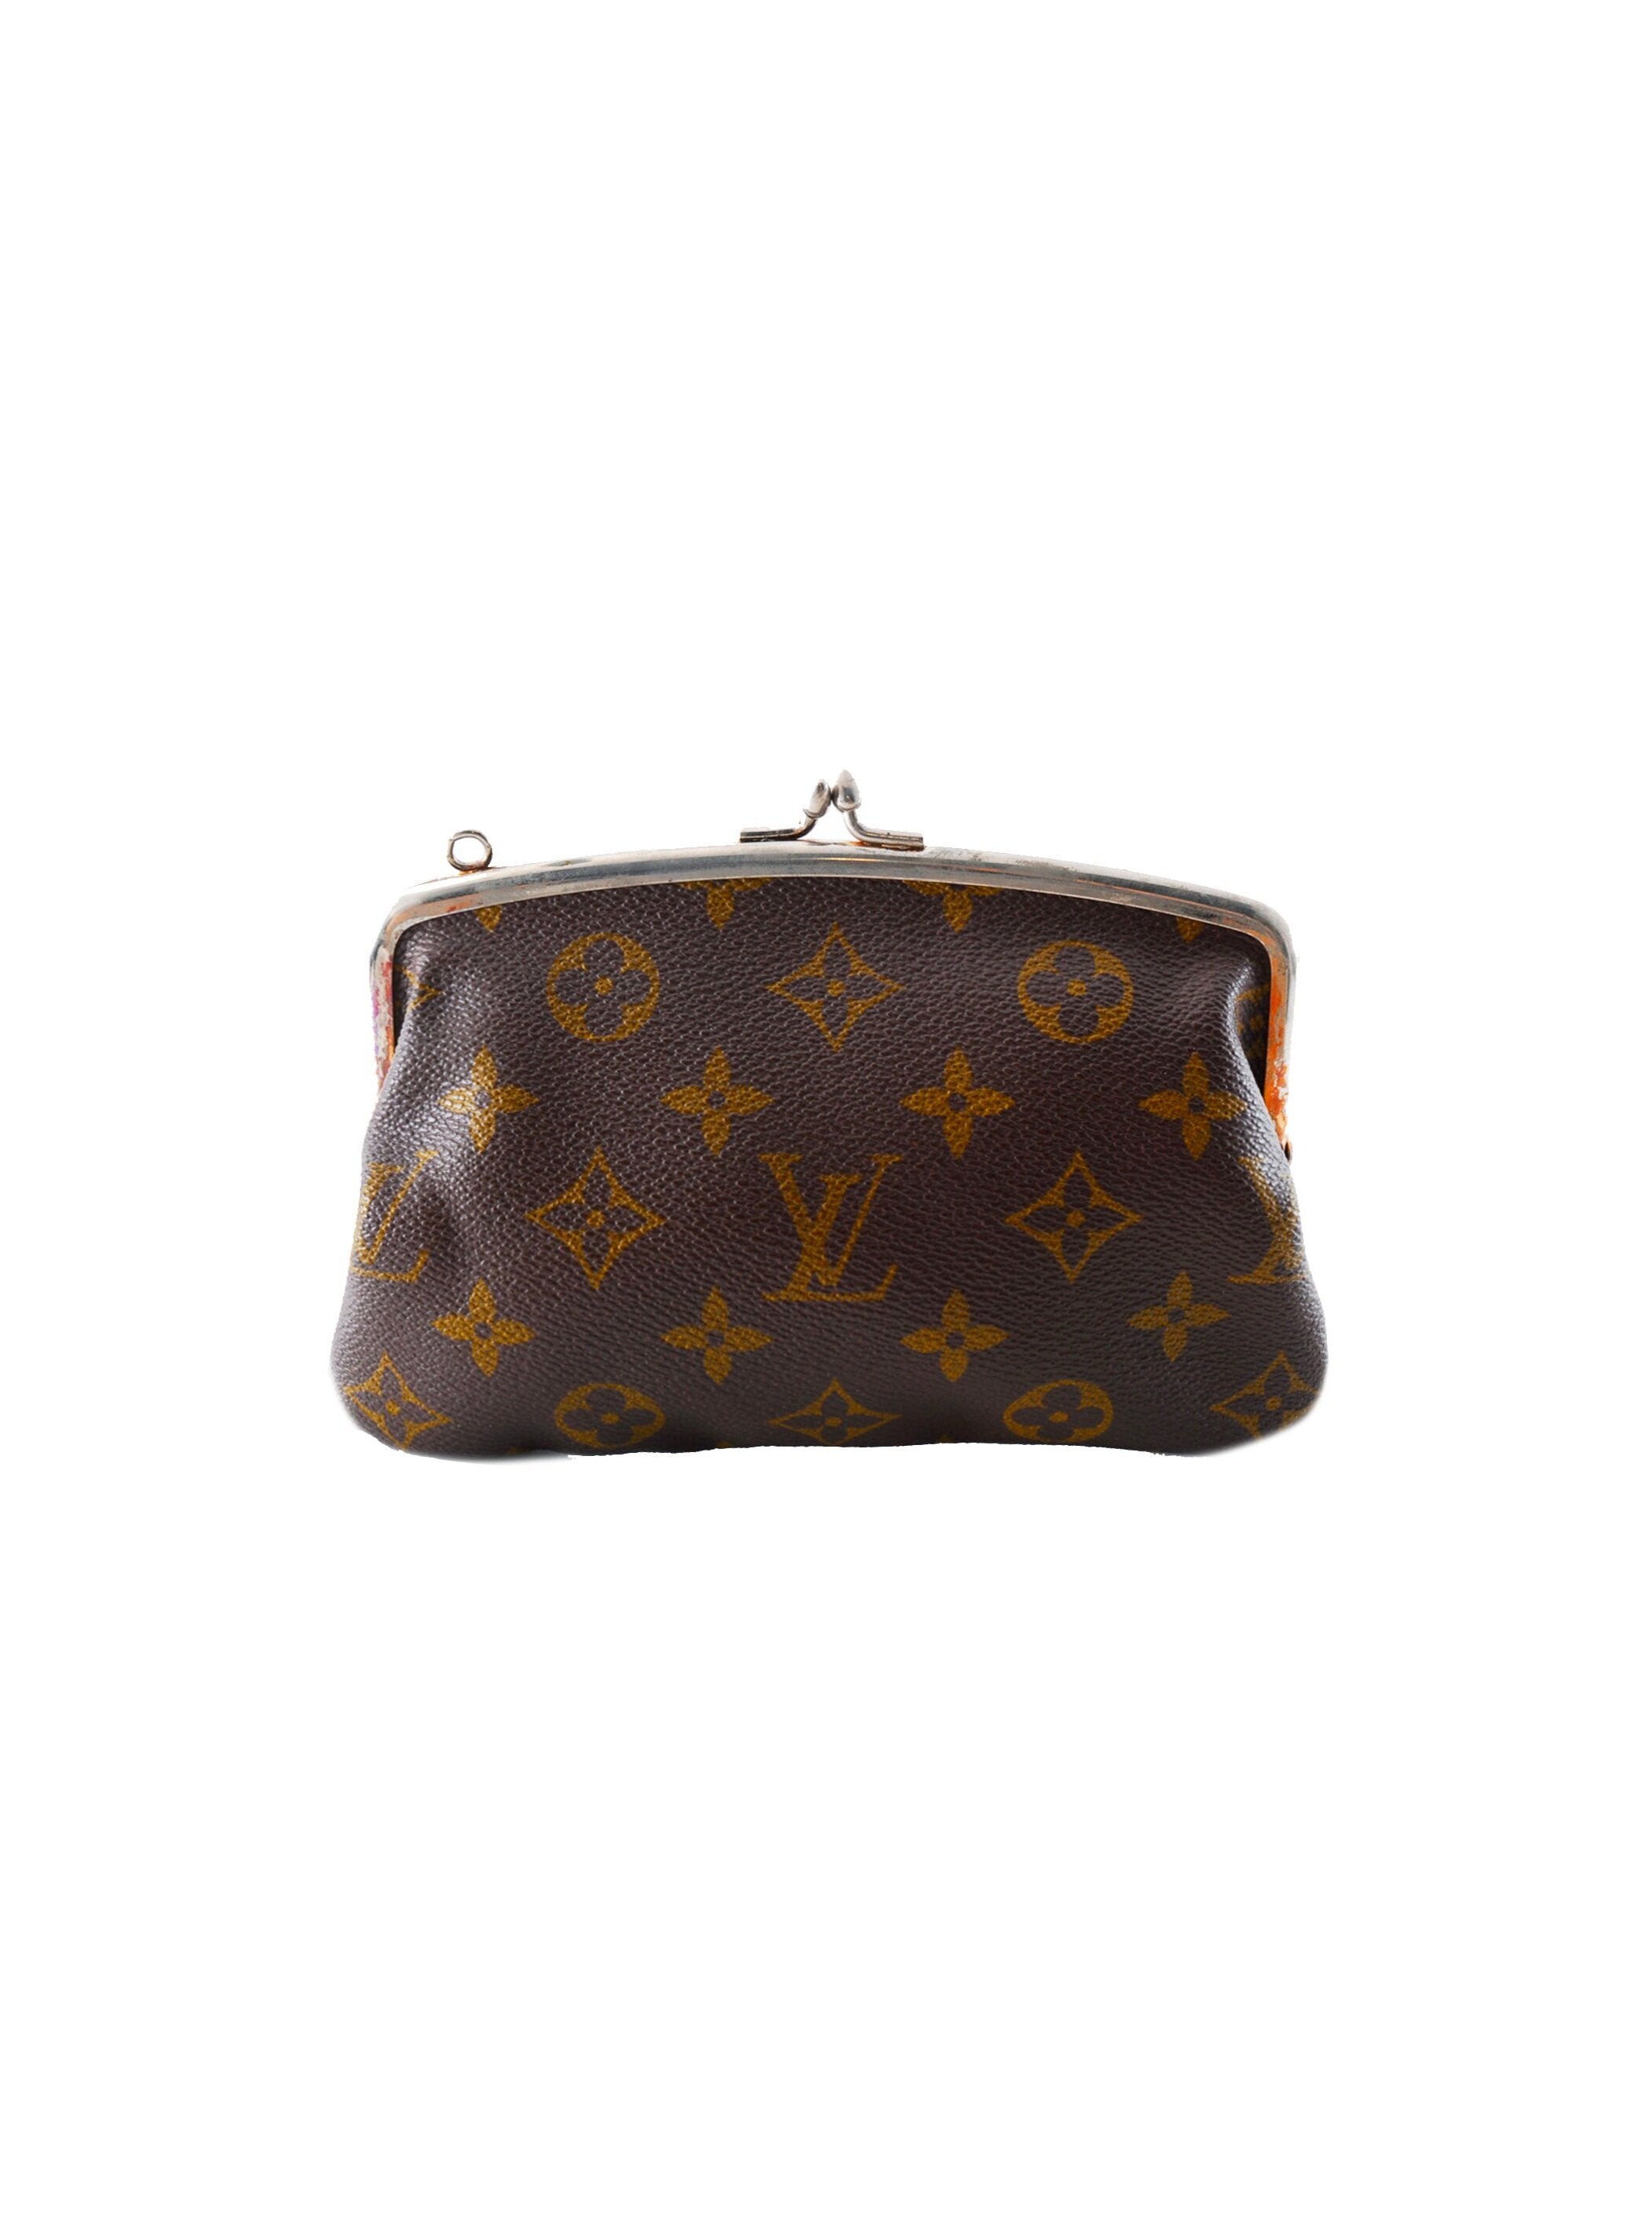 Heart-Shaped Purses: The 2010 Louis Vuitton Valentines Catelog for Women